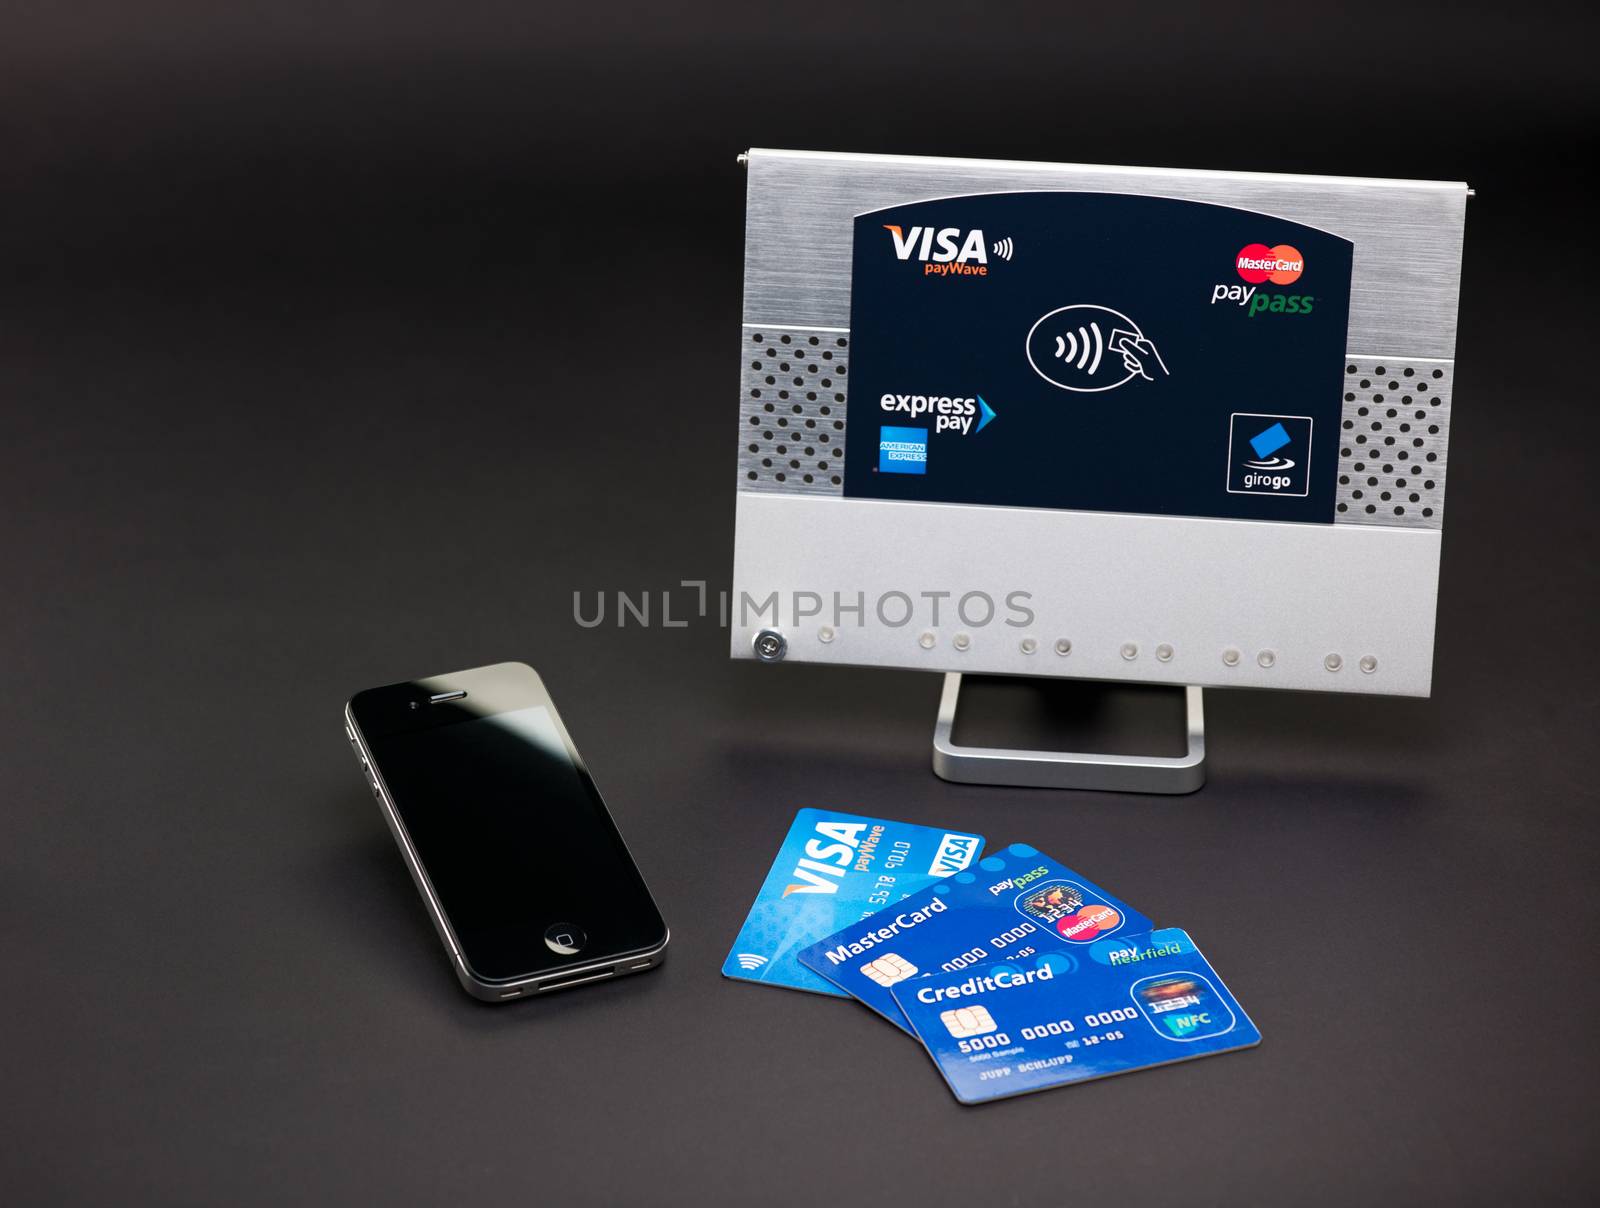 Aachen, Germany - August 05, 2012 - Studioshot of payment variations ( Apple iPhone 4, Visa paywve, mastercard paypass) in front of a NFC terminal wich accepts visa, mastercard, american express and girogo contactless payments.